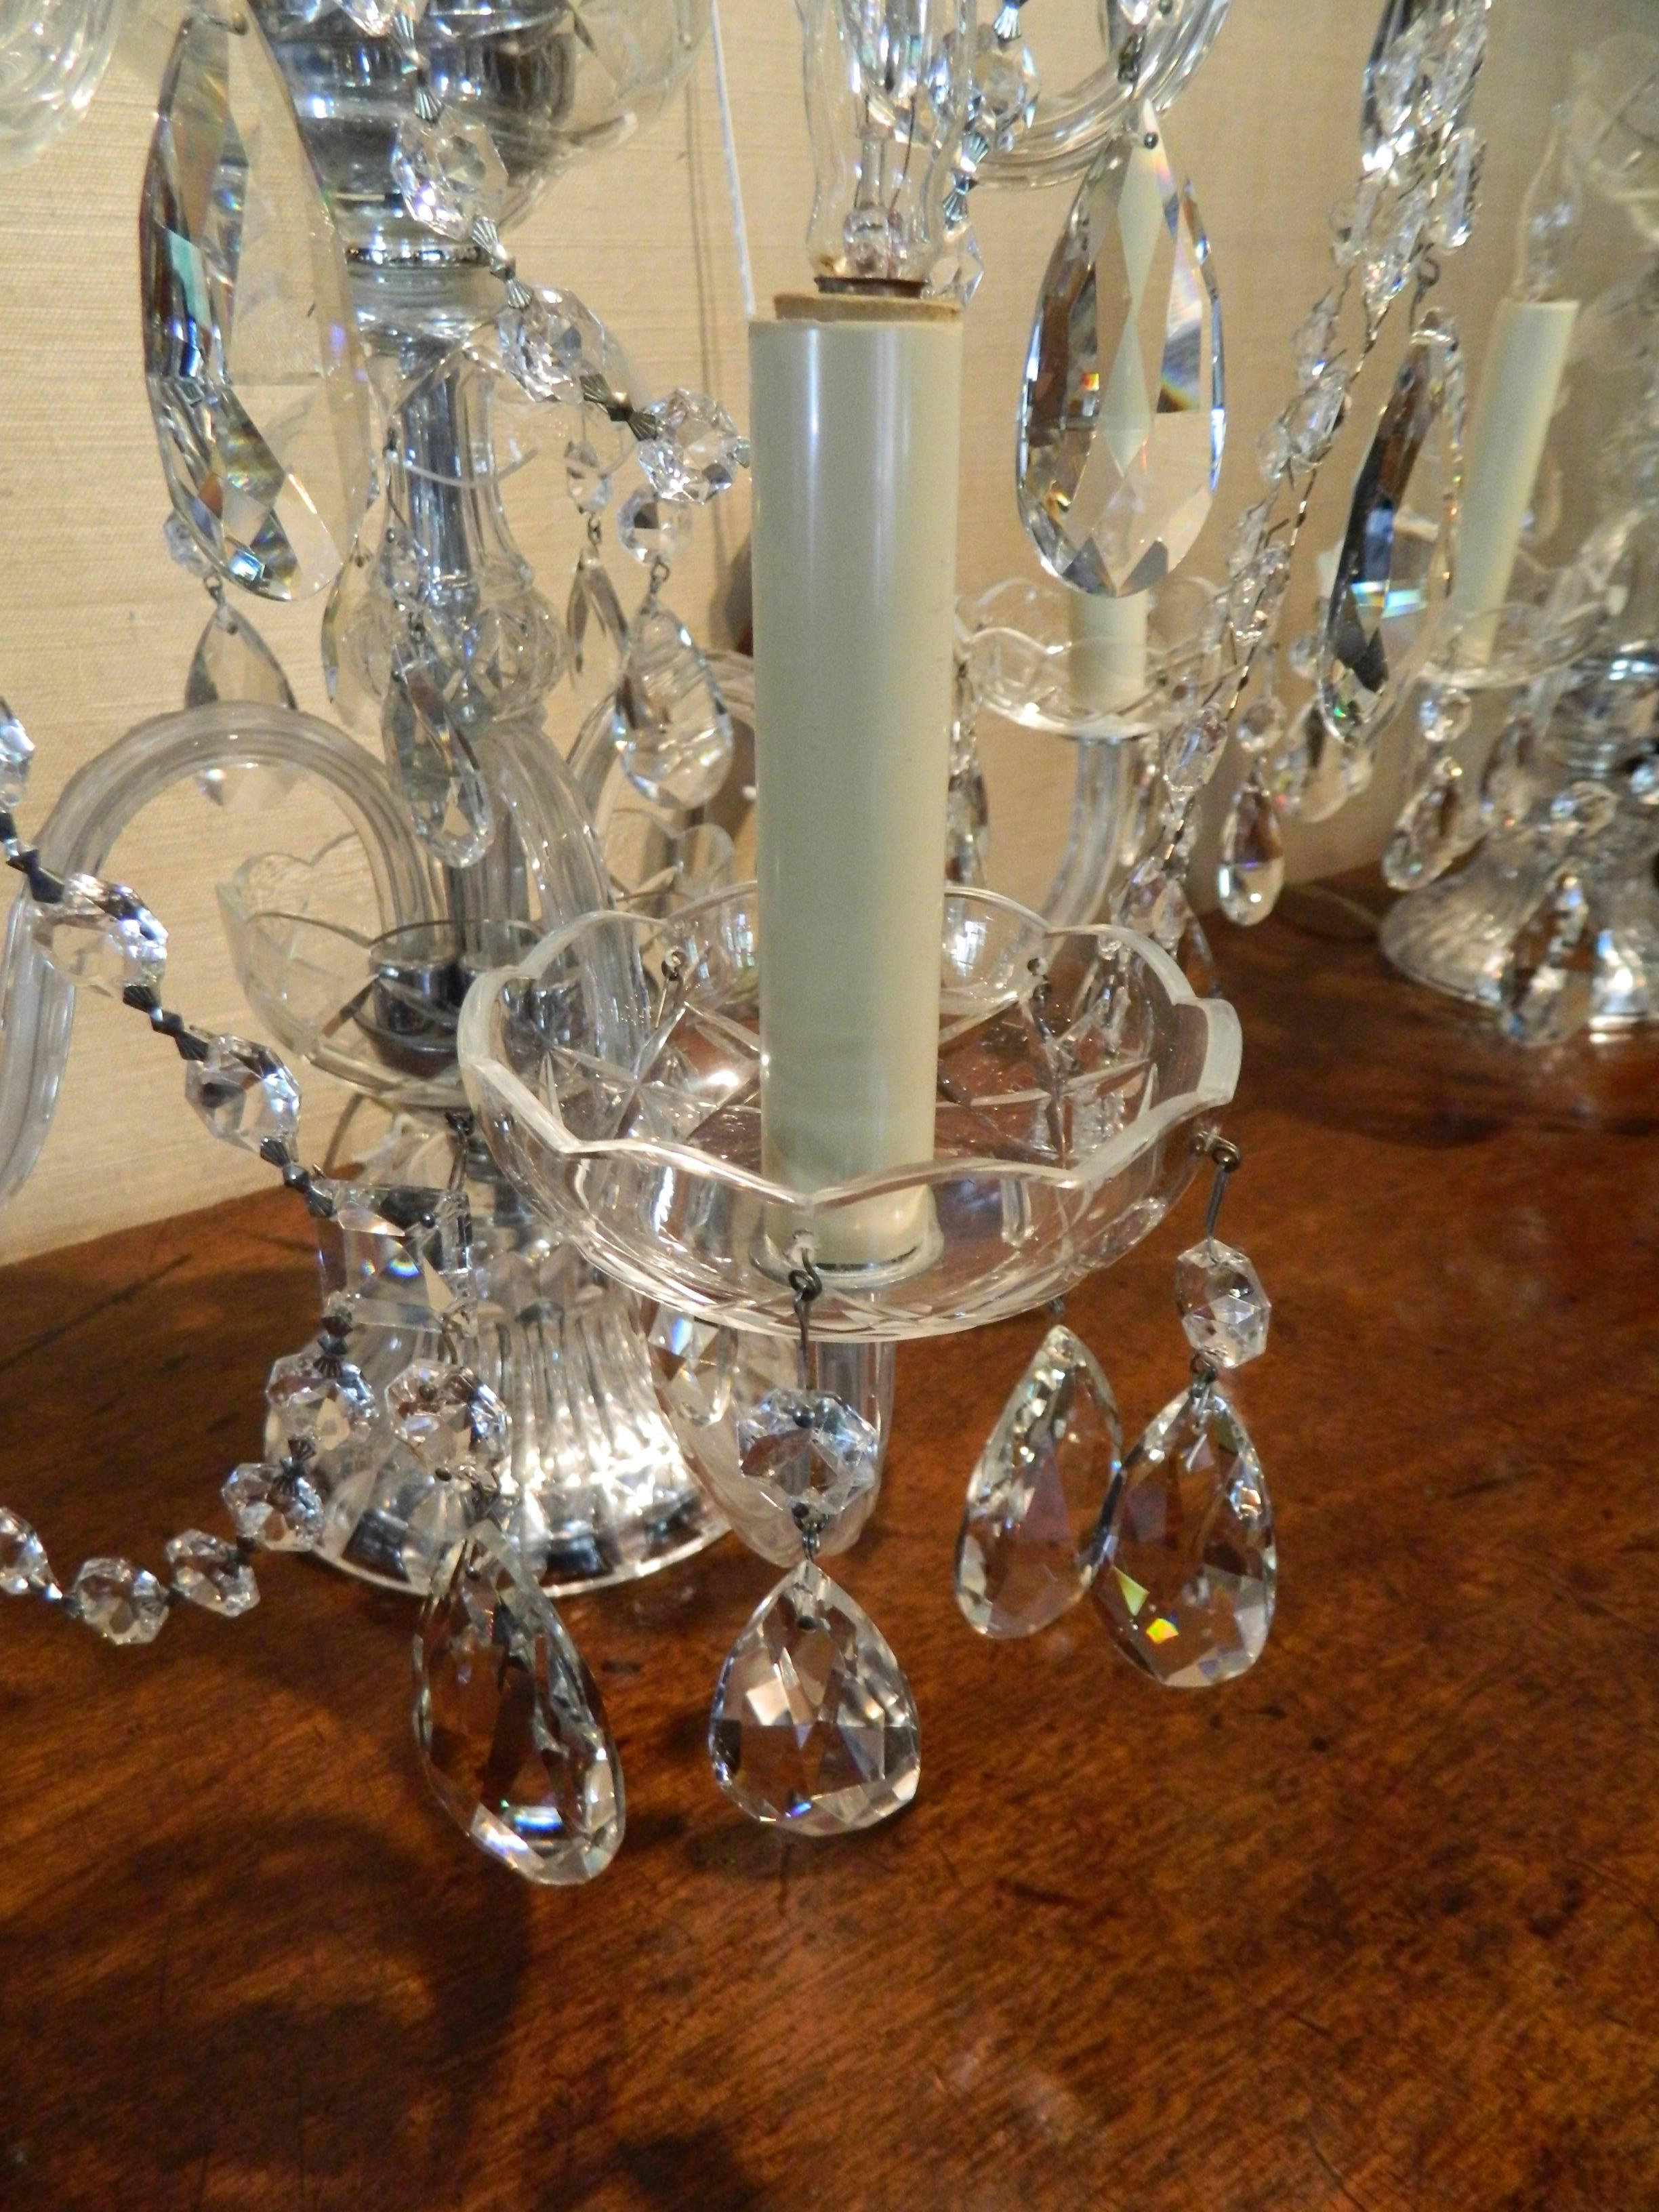 Pair of crystal five branch electrified candelabras with swags, early 20th century. Bottom tier with three candleholders and bobeges and top tier with two candleholders. S arms with swags and crystal drops.
           